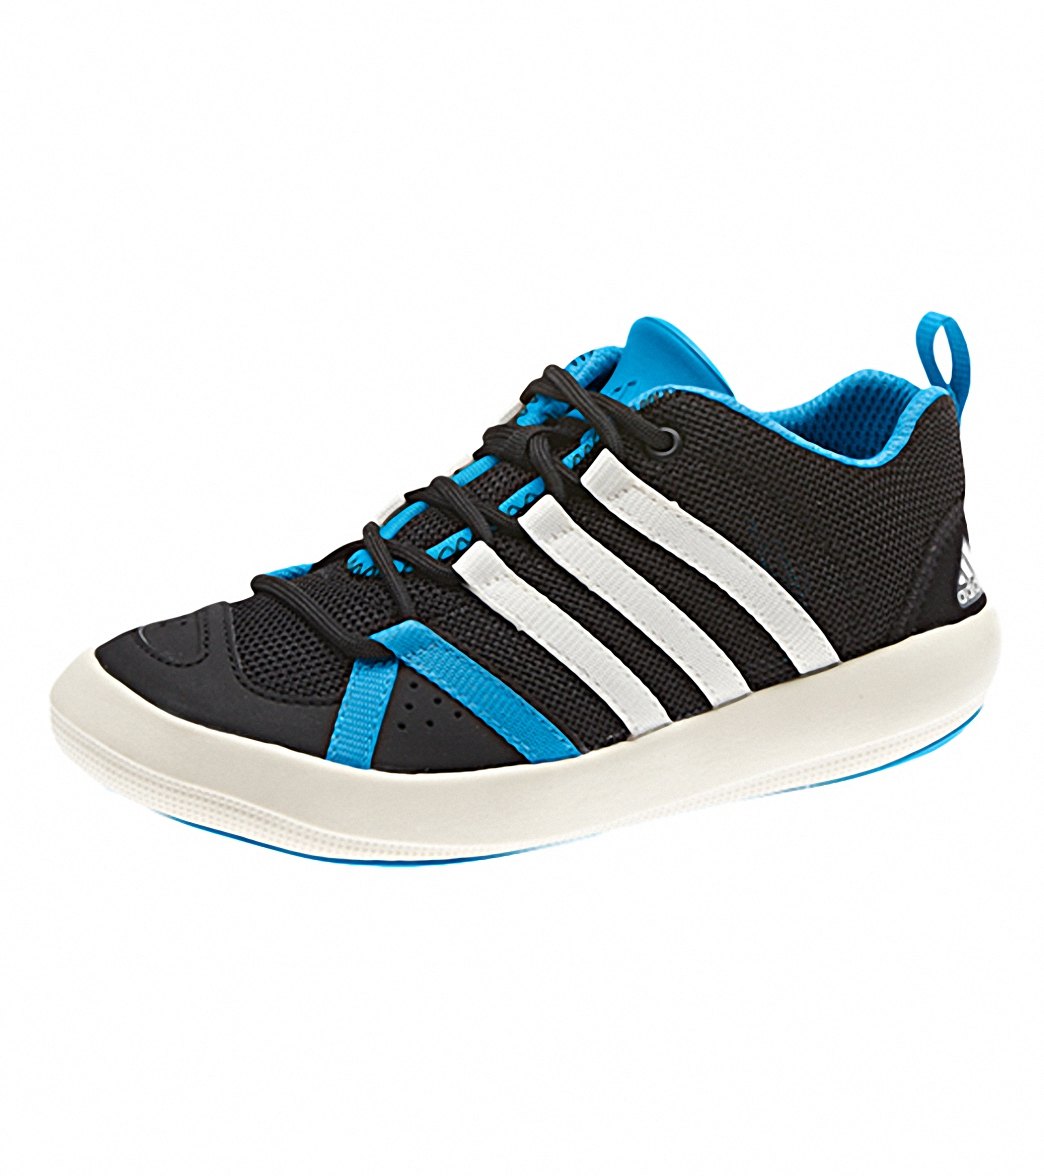 Adidas Boys' Boat Lace Water Shoes at SwimOutlet.com